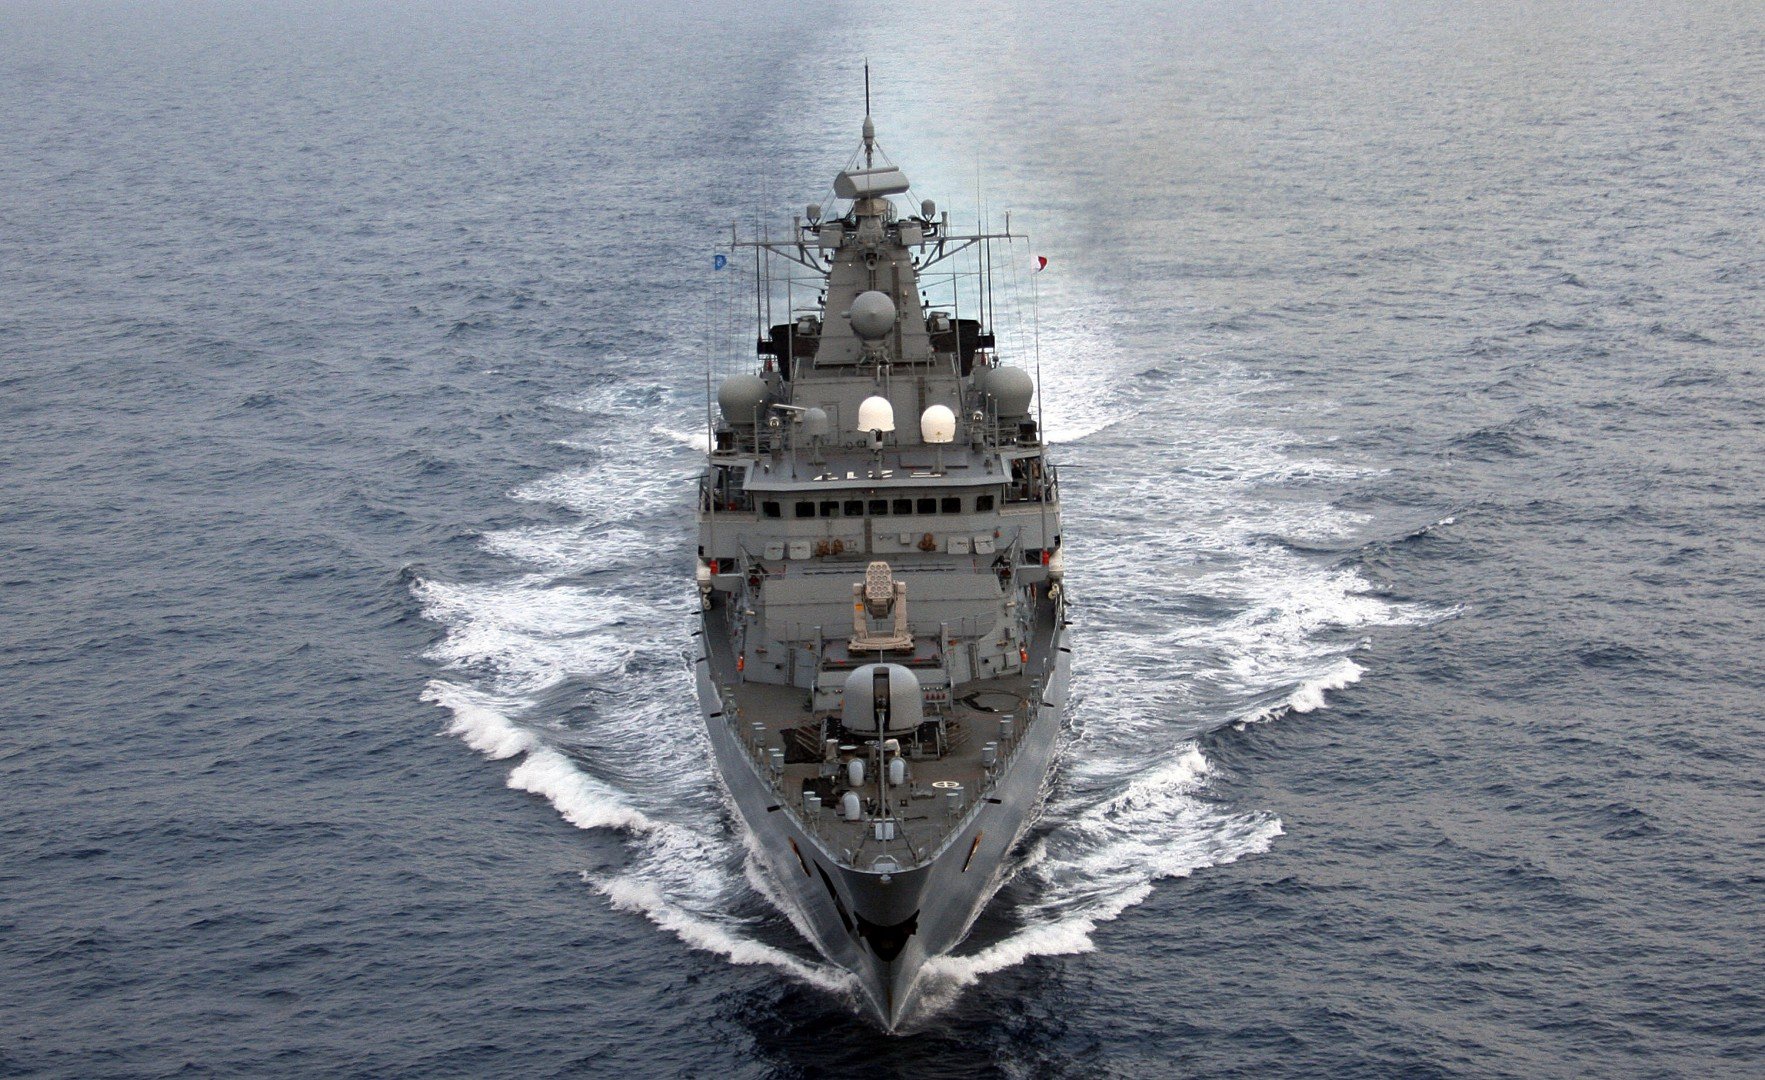 First German warship in almost two decades enters South China Sea